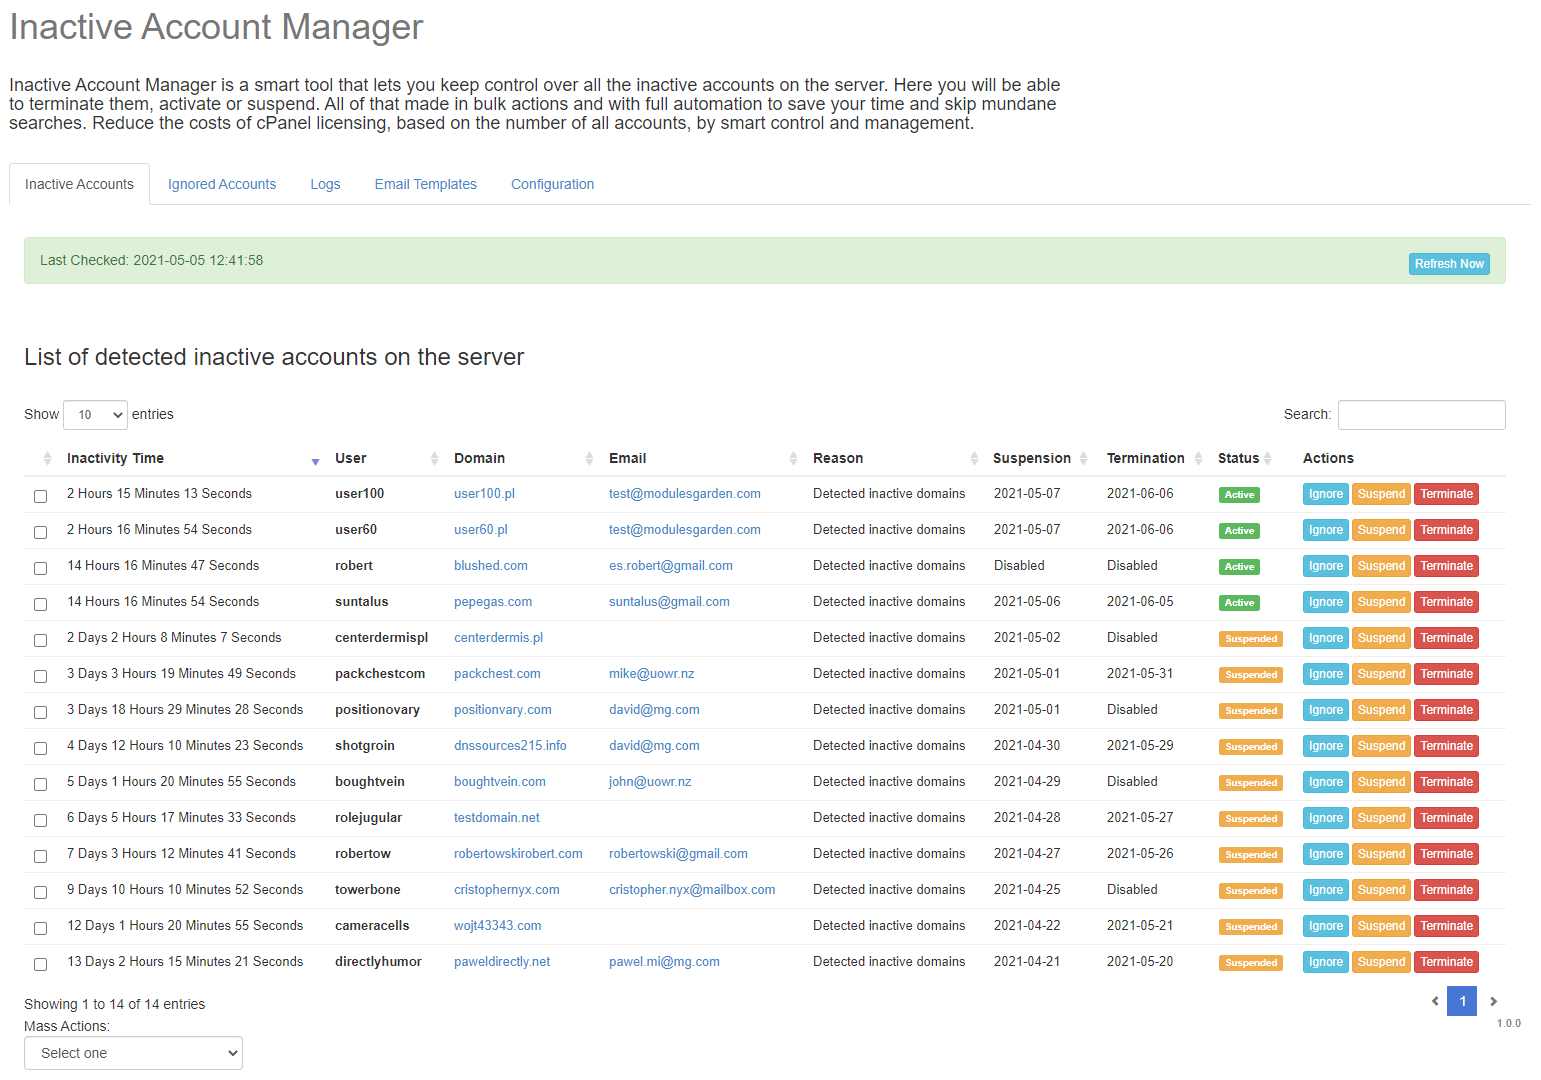 Inactive Account Manager For cPanel: Extension Screenshot 1